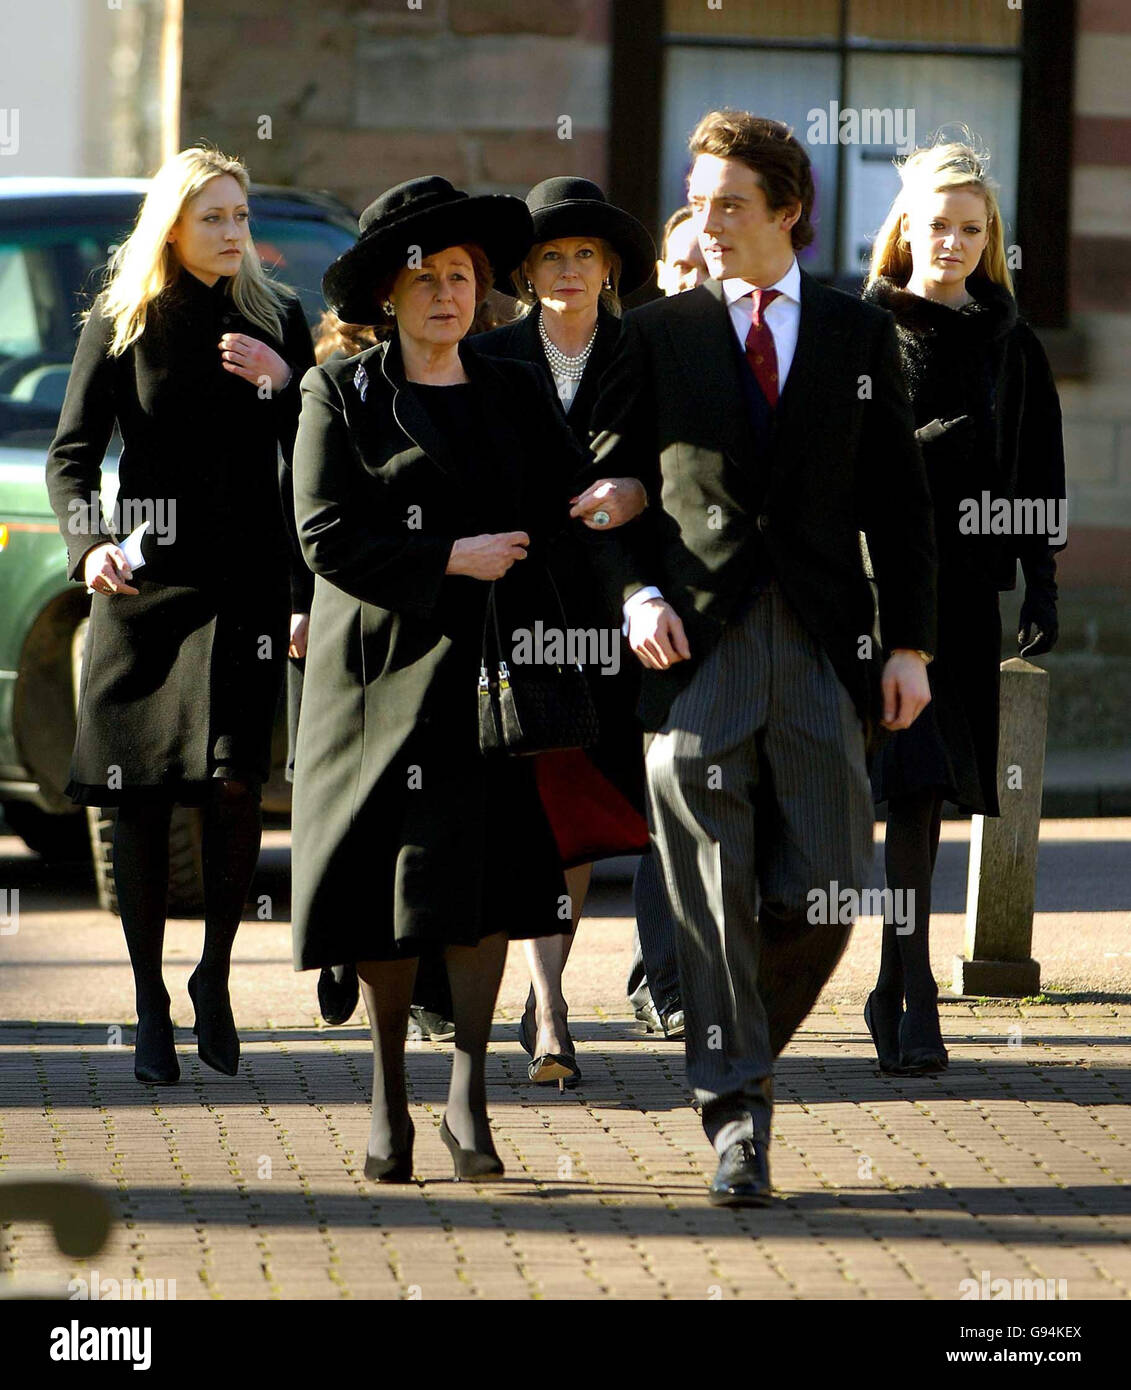 The late Lord Lichfield's son, the sixth Earl of Lichfield (Anson) with Lord Lichfield's sister Lady Elizabeth Shakerley (both front) and daughters Lady Rose Anson (left), Lady Eloise Anson (right) and partner Lady Annunziata arrive for the late Lord Lichfield's Service of Thanksgiving at Lichfield Cathedral, Thursday February 9, 2006. The 66-year-old, who was the Queen's first cousin once removed, died suddenly in November last year after suffering a stroke. See PA Story MEMORIAL Lichfield. PRESS ASSOCIATION Photo. Photo credit should read: Rui Vieira/PA Stock Photo